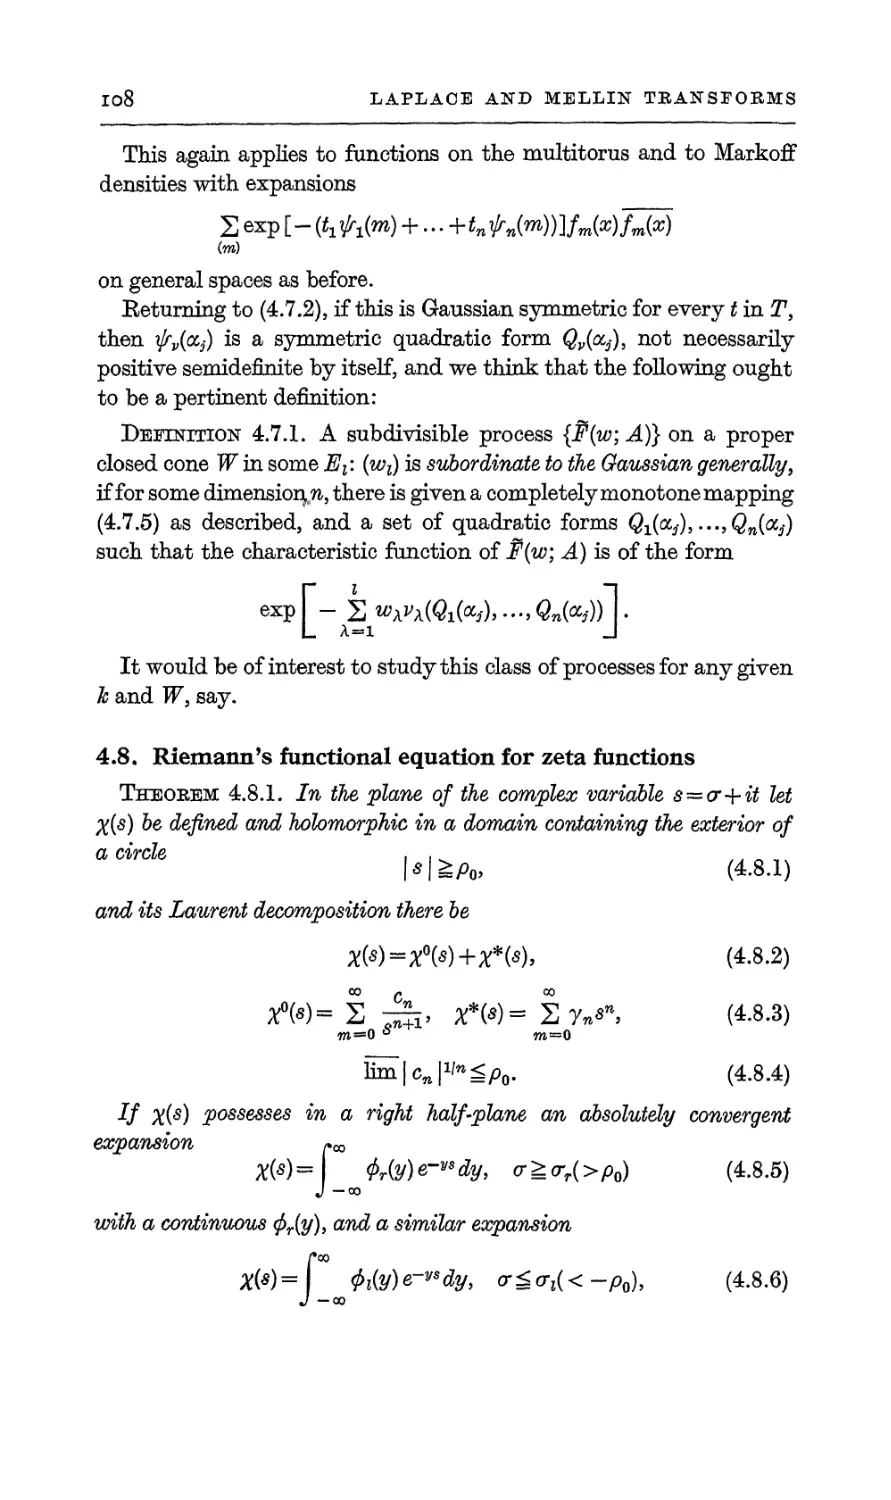 4.8. Riemann's functional equation for zeta functions